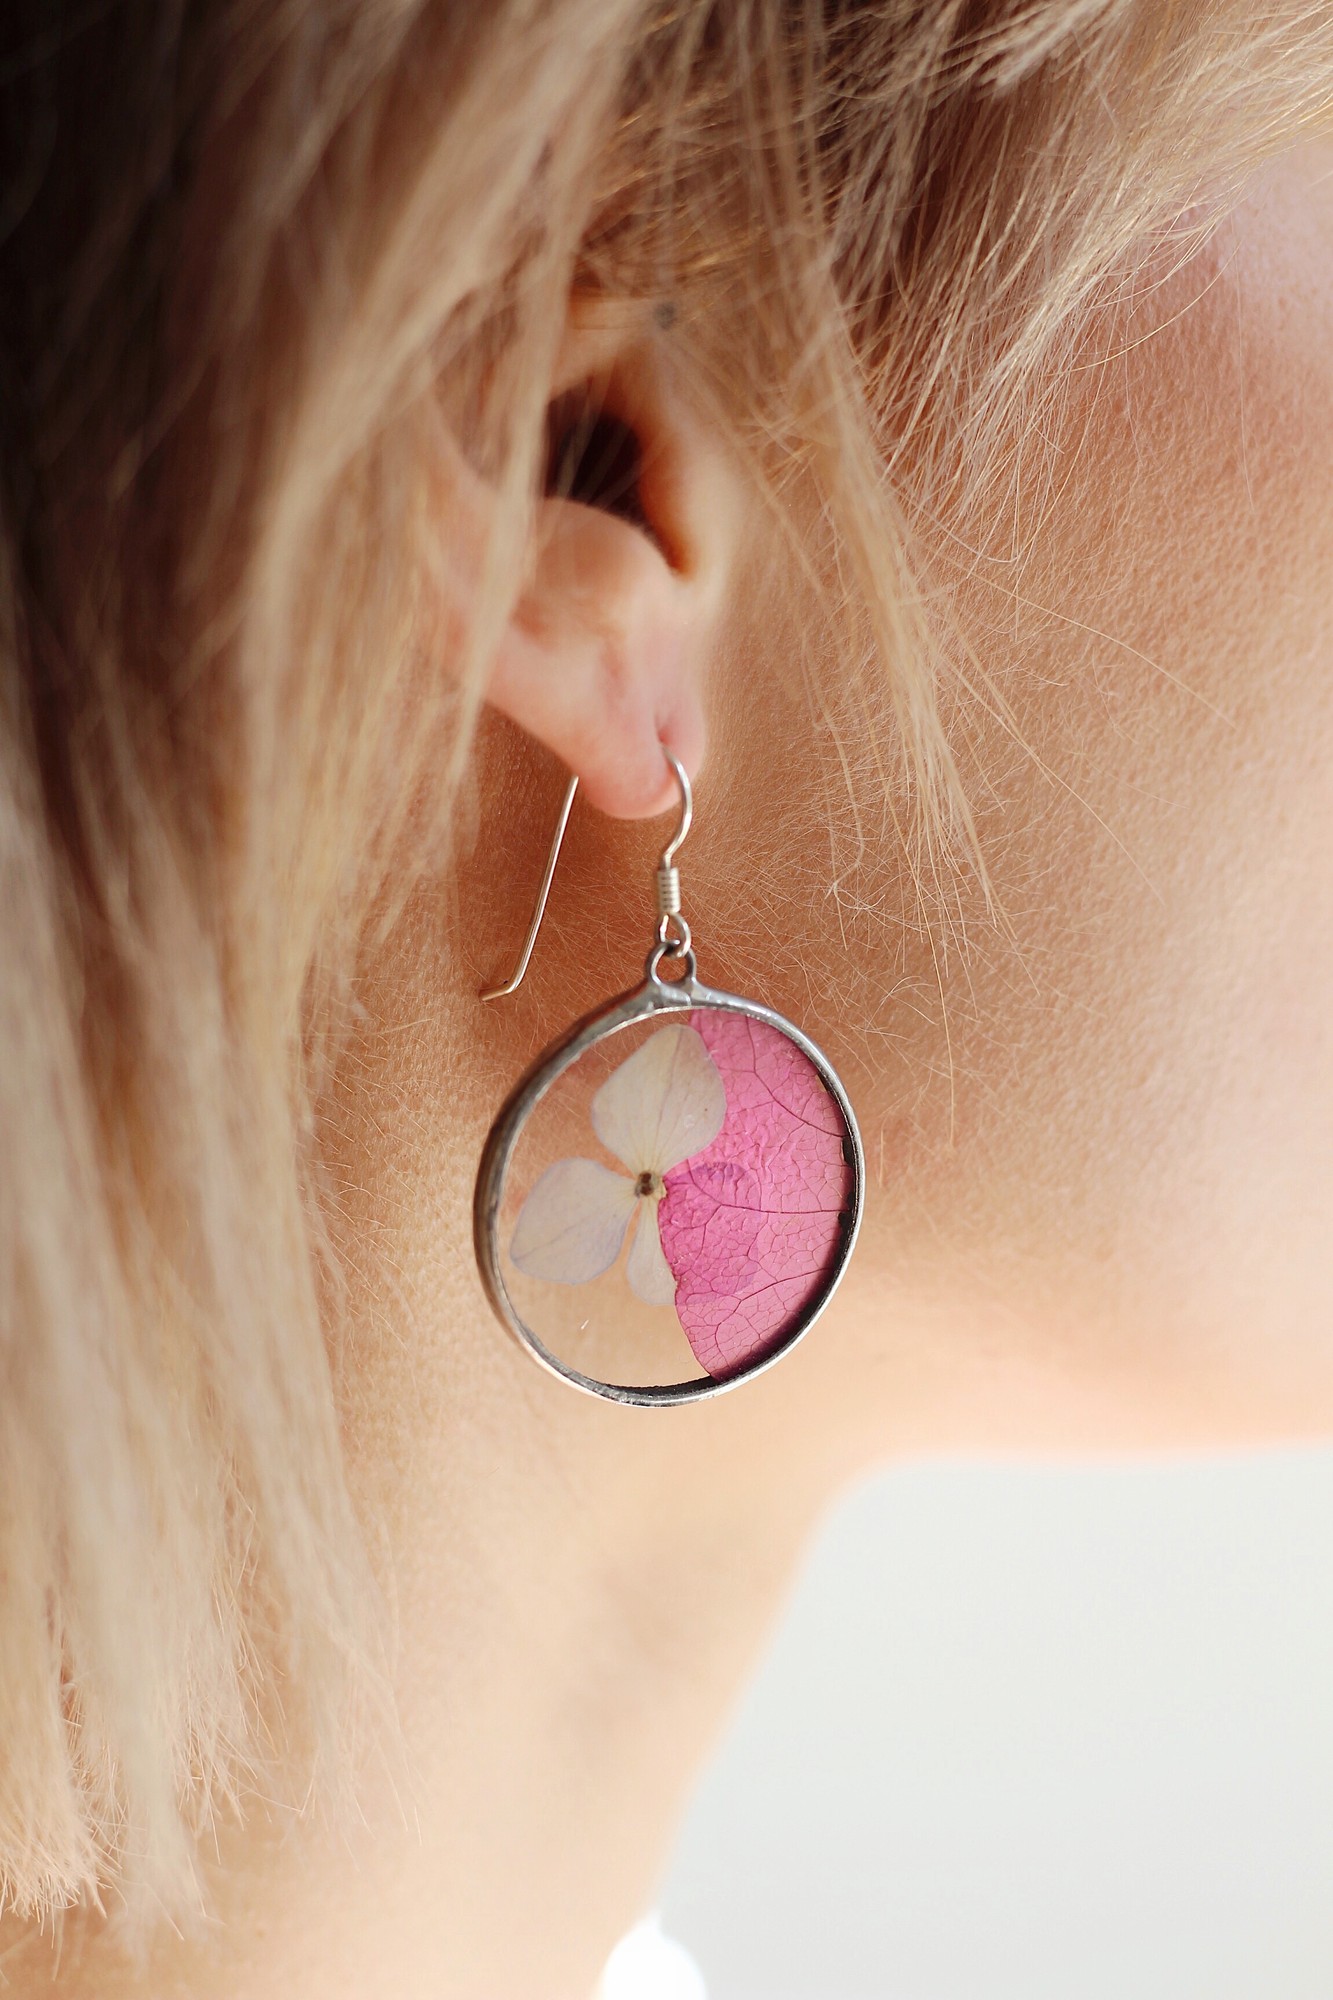 Minimalist pressed flower earrings in stained glass technique